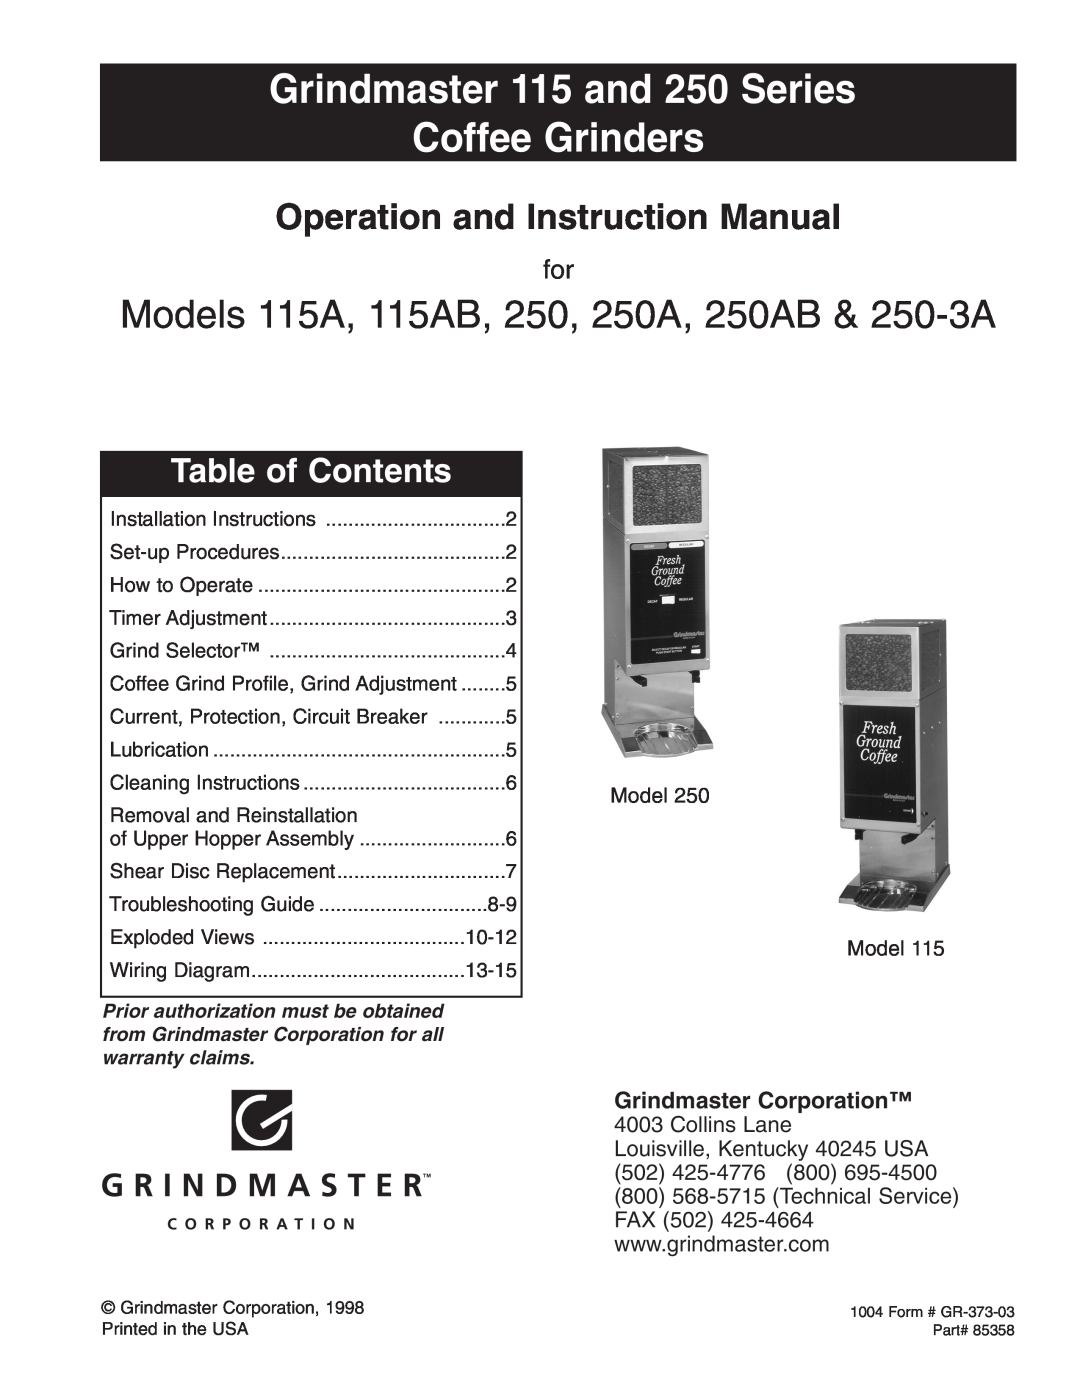 Grindmaster instruction manual Grindmaster 115 and 250 Series Coffee Grinders, Table of Contents, 502425-4776800 